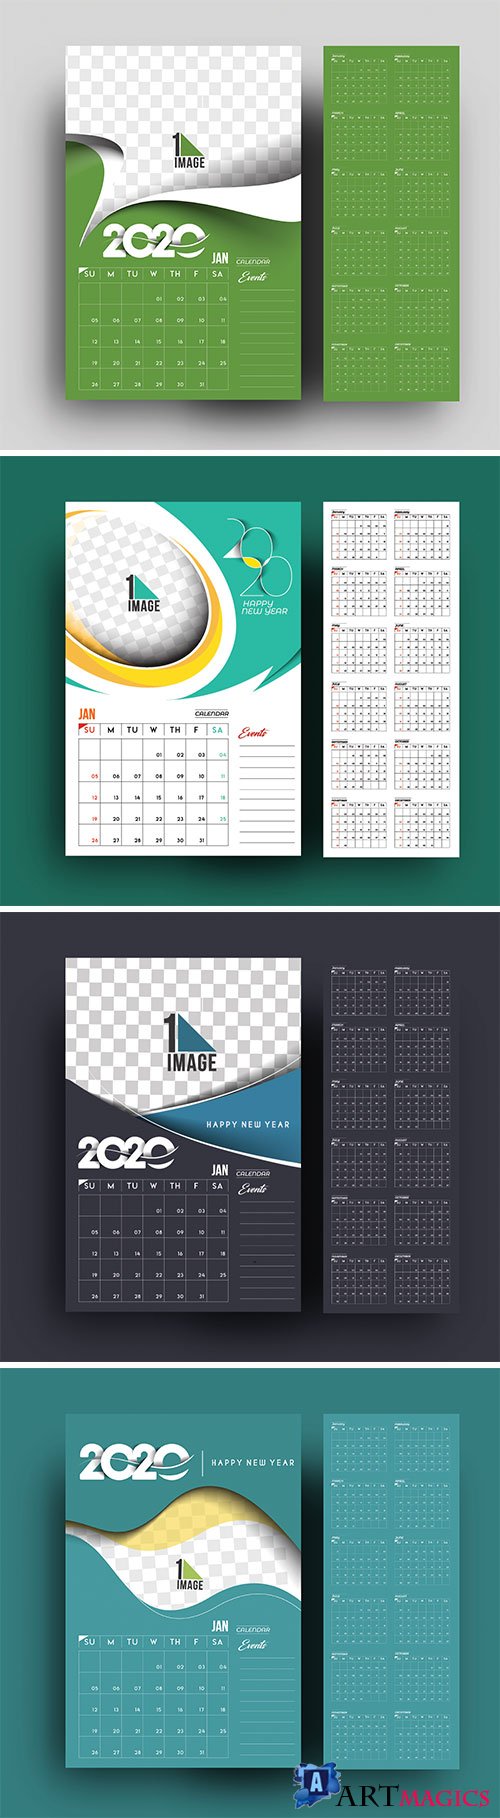 Happy new year 2020 Calendar, holiday design elements for holiday cards